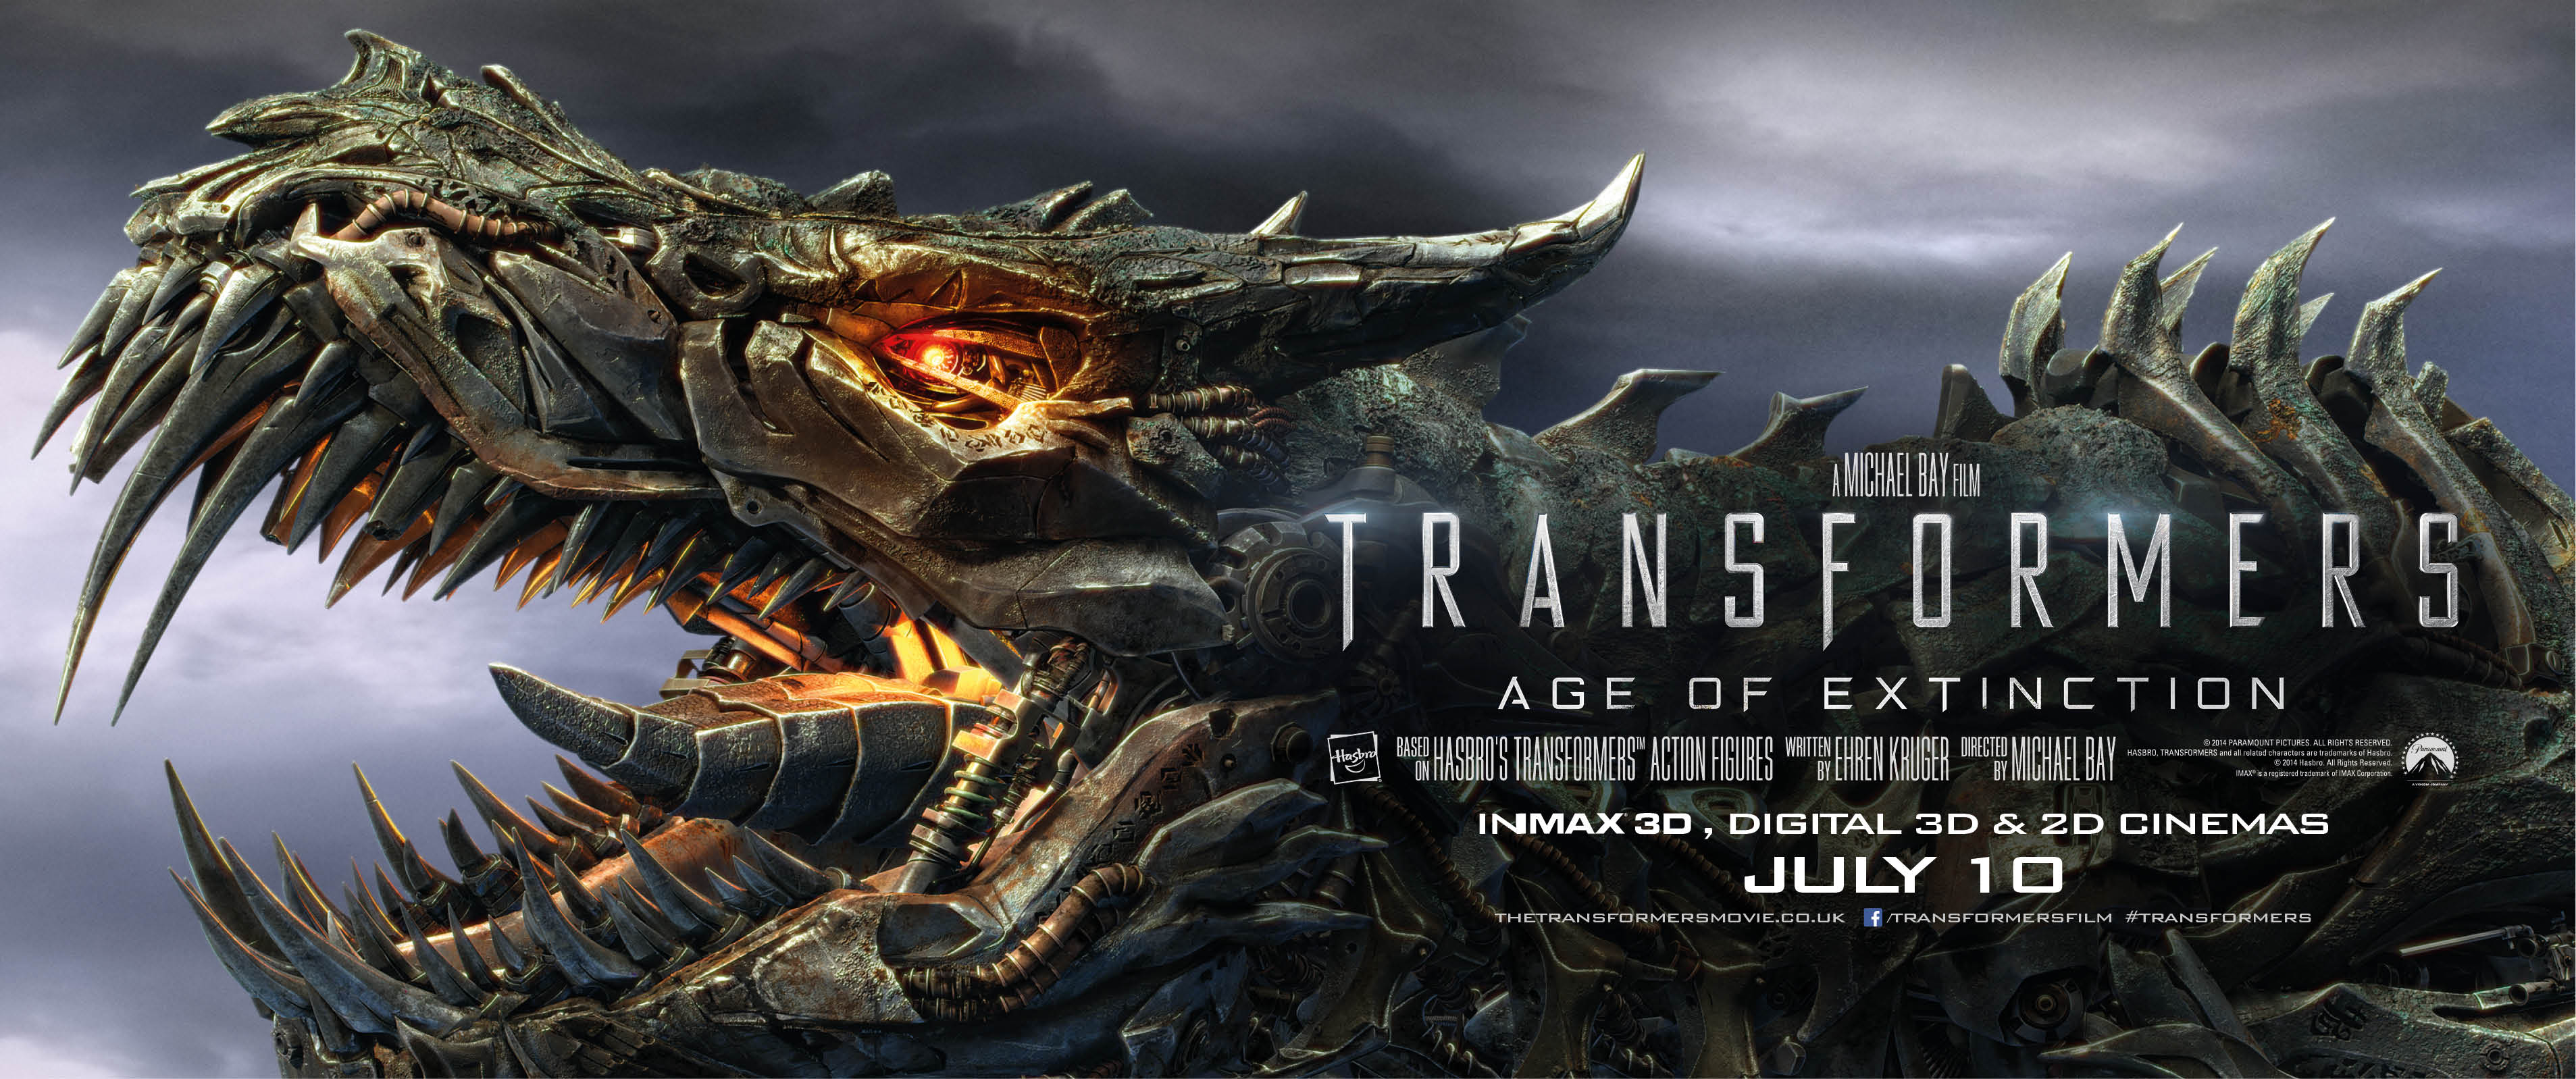 Transformers 4 poster